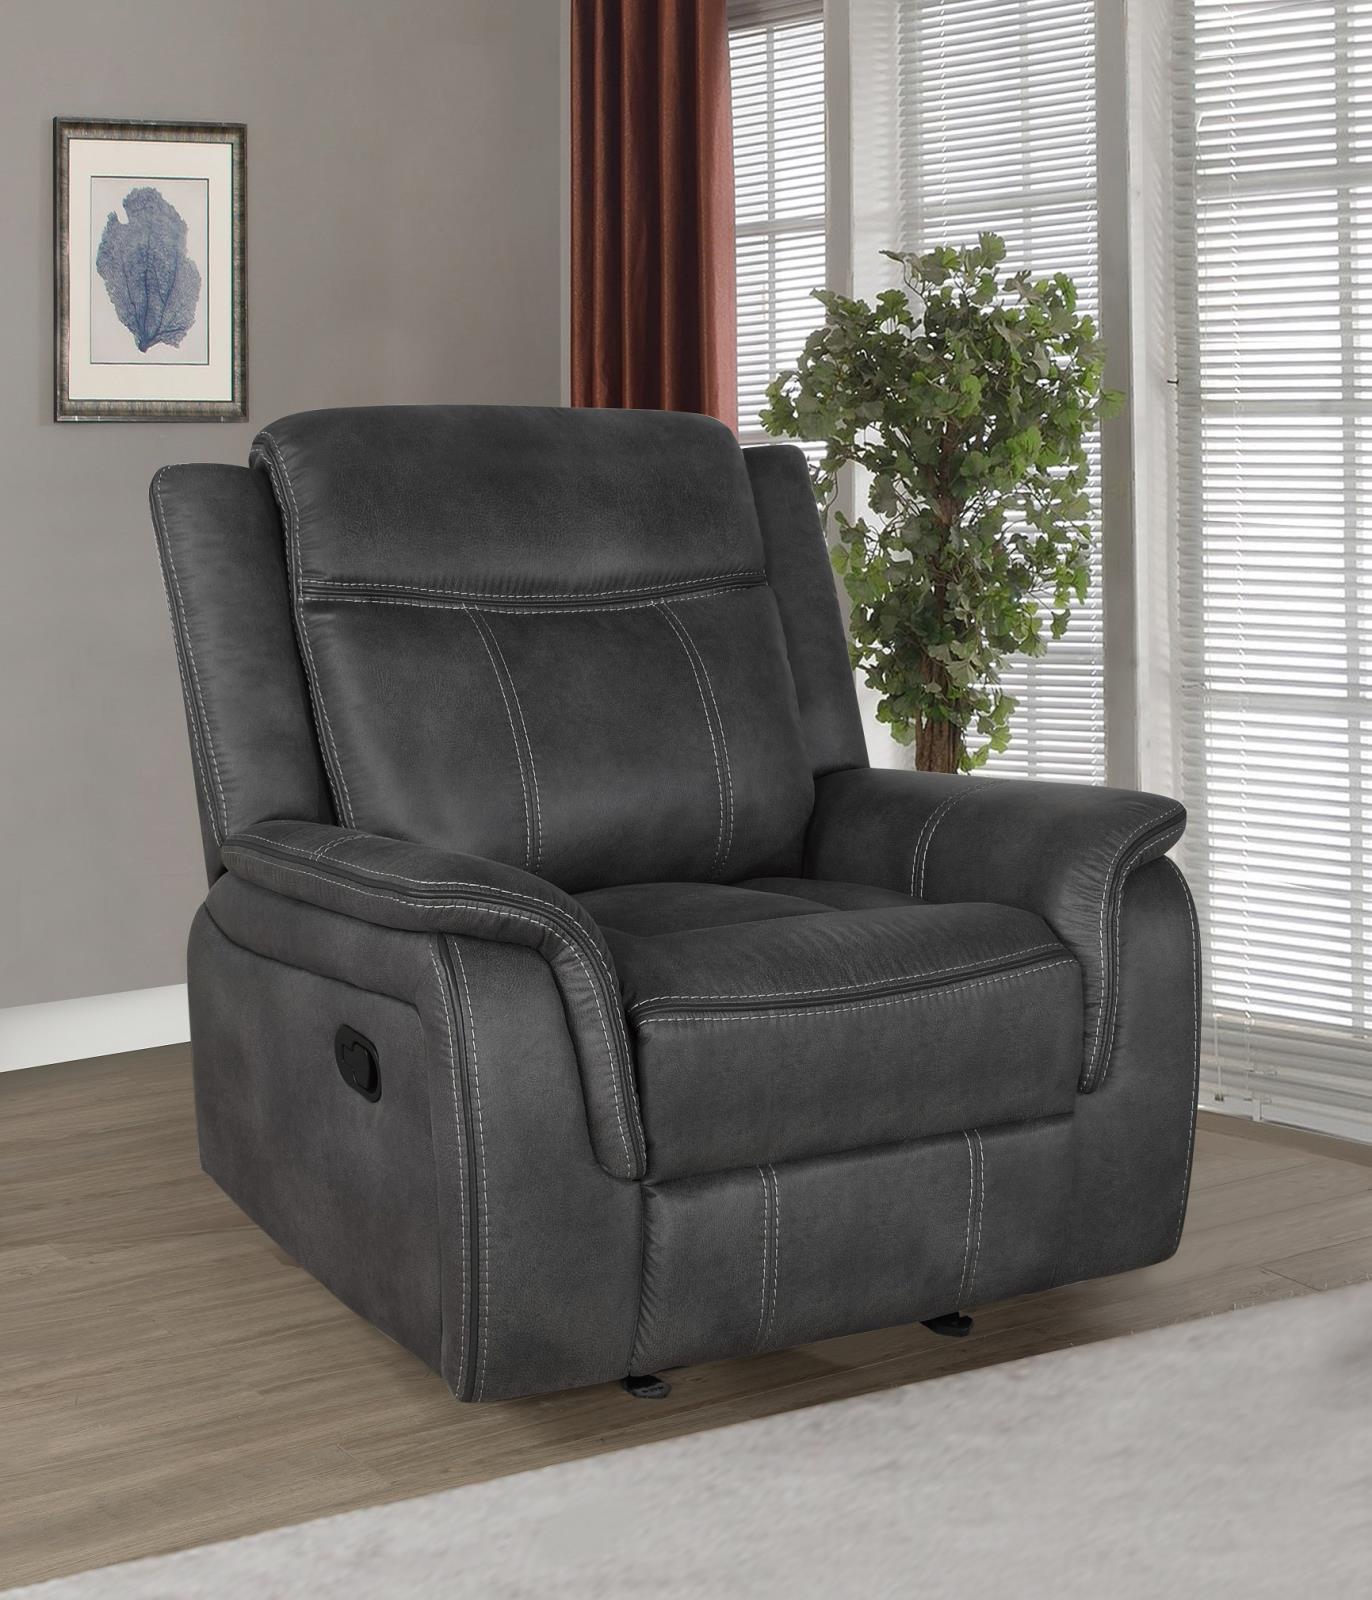 Lawrence Upholstered Tufted Back Glider Recliner - What A Room